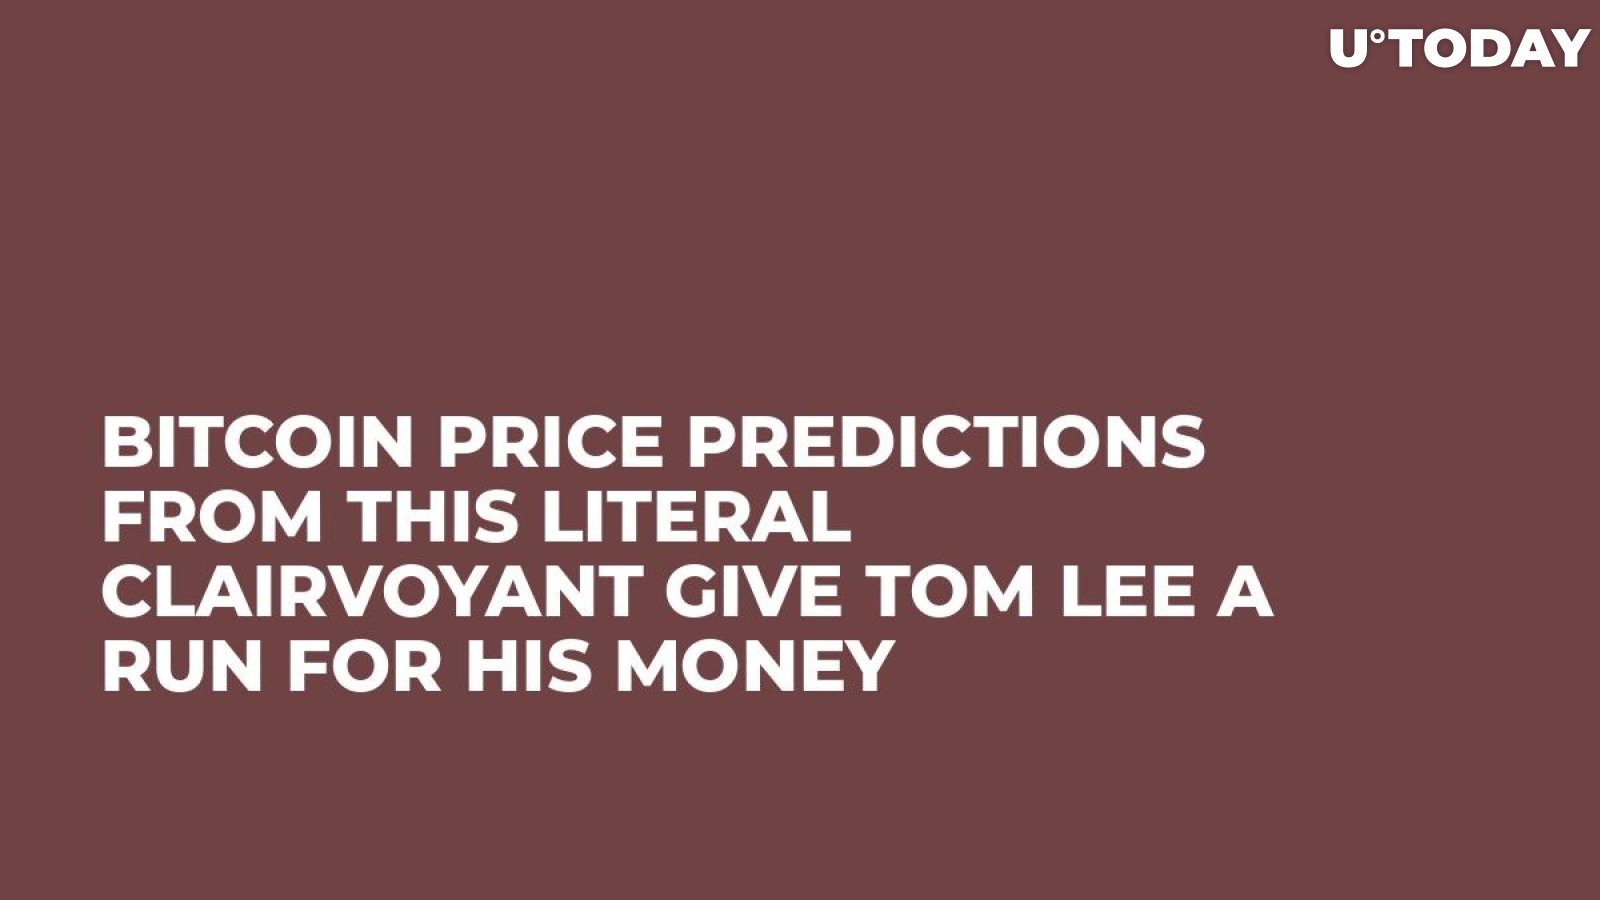 Bitcoin Price Predictions from This Literal Clairvoyant Give Tom Lee a Run for His Money 